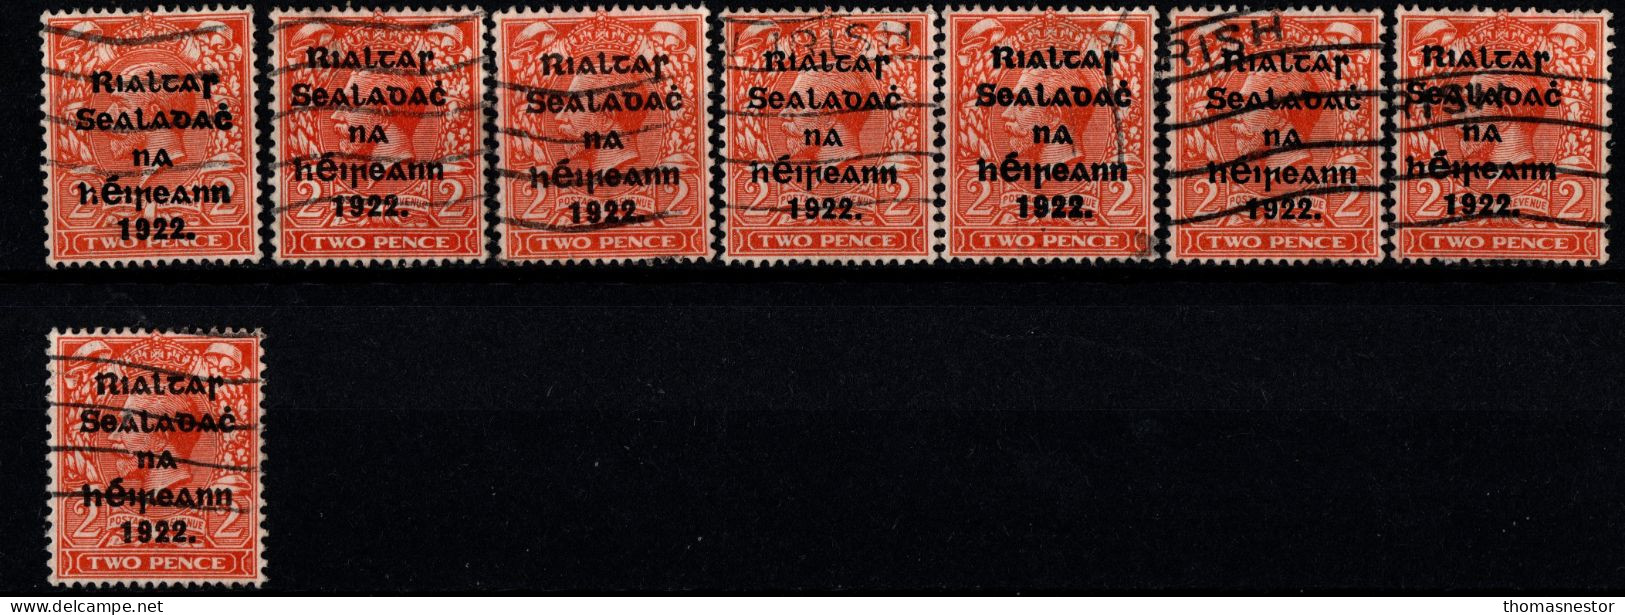 1922 Thom Rialtas 5 line Blue Black Ink (July- Nov) Used Fiscal cancellation, parcel/ commercial cancel 293 in total.